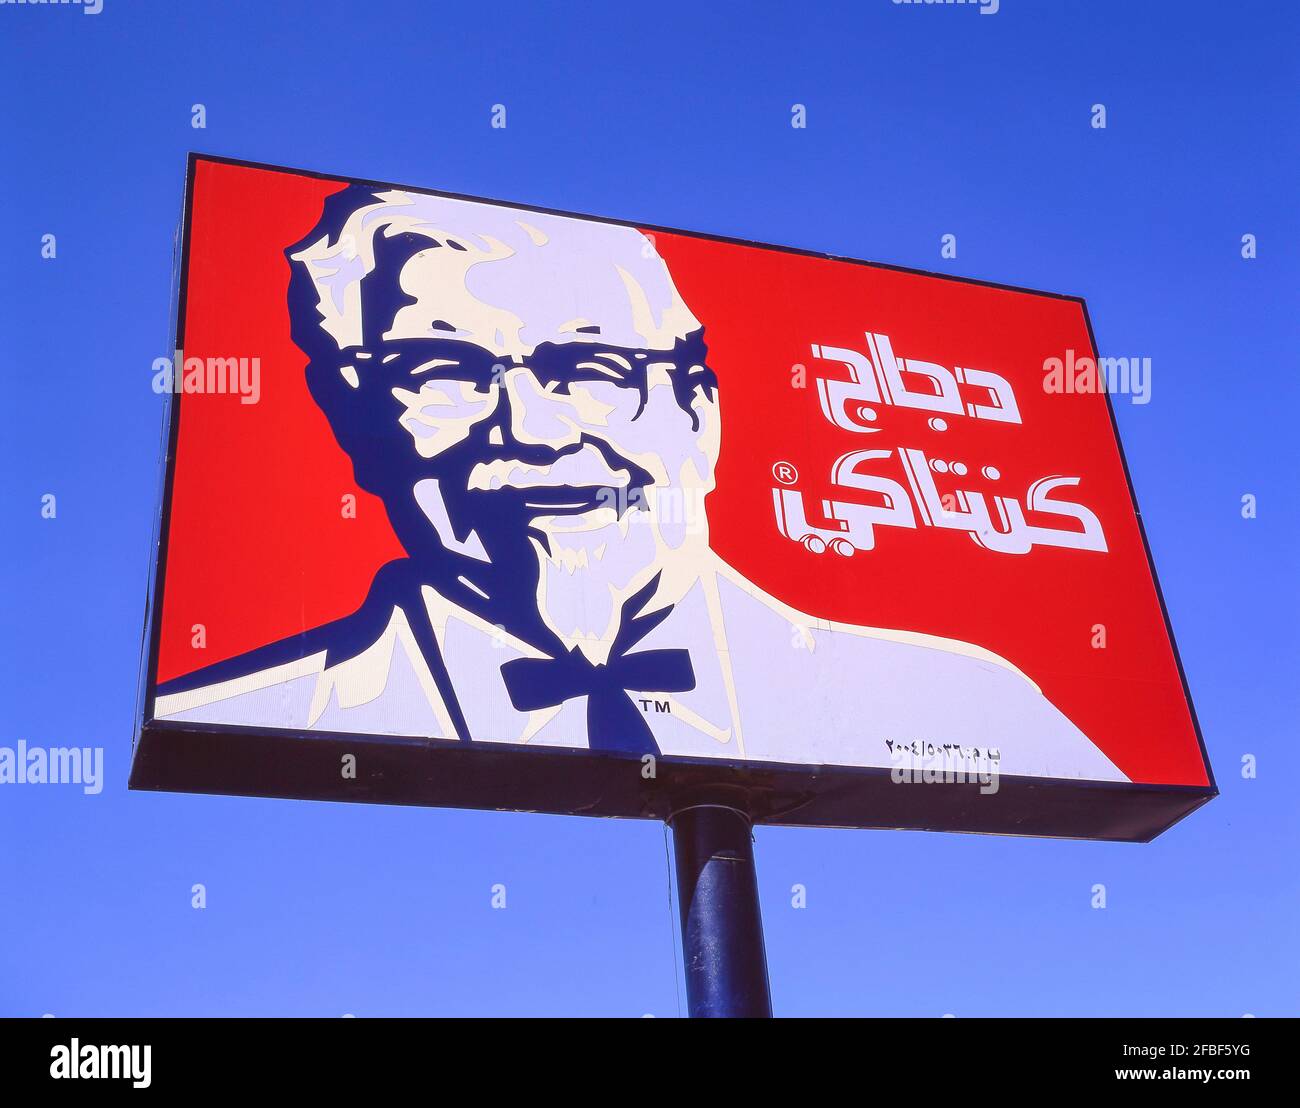 Kentucky Fried Chicken advertising sign, Muscat, Masqat Governorate, Sultanate of Oman Stock Photo